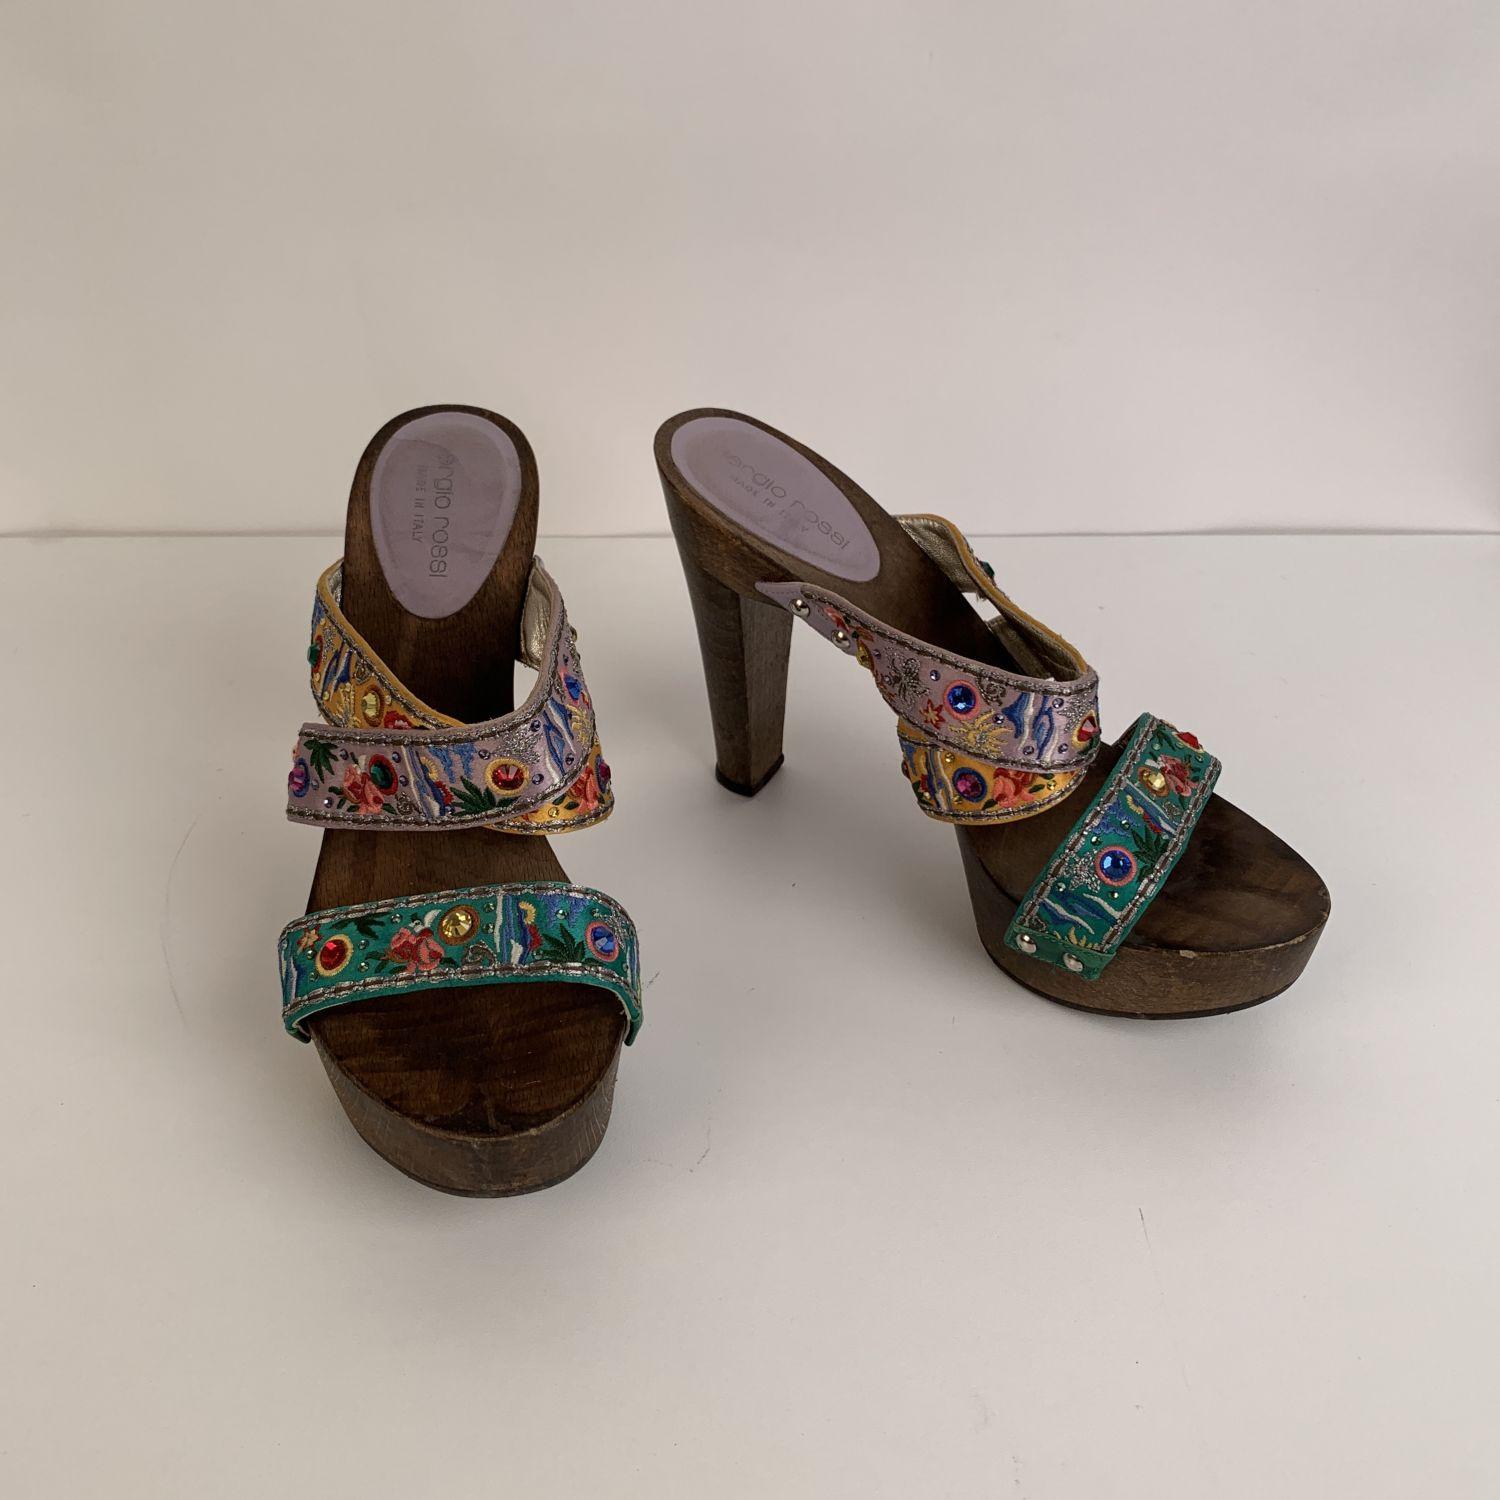 Sergio Rossi wooden mules with multicolored straps. Rhinestones embellishment. Made in Italy.1 inch platform. Size: 37 Heels height: 5 inches - 12,7 cm



Details

MATERIAL: Wood

COLOR: Multicolor

MODEL: Clogs

GENDER: Women

SIZE: